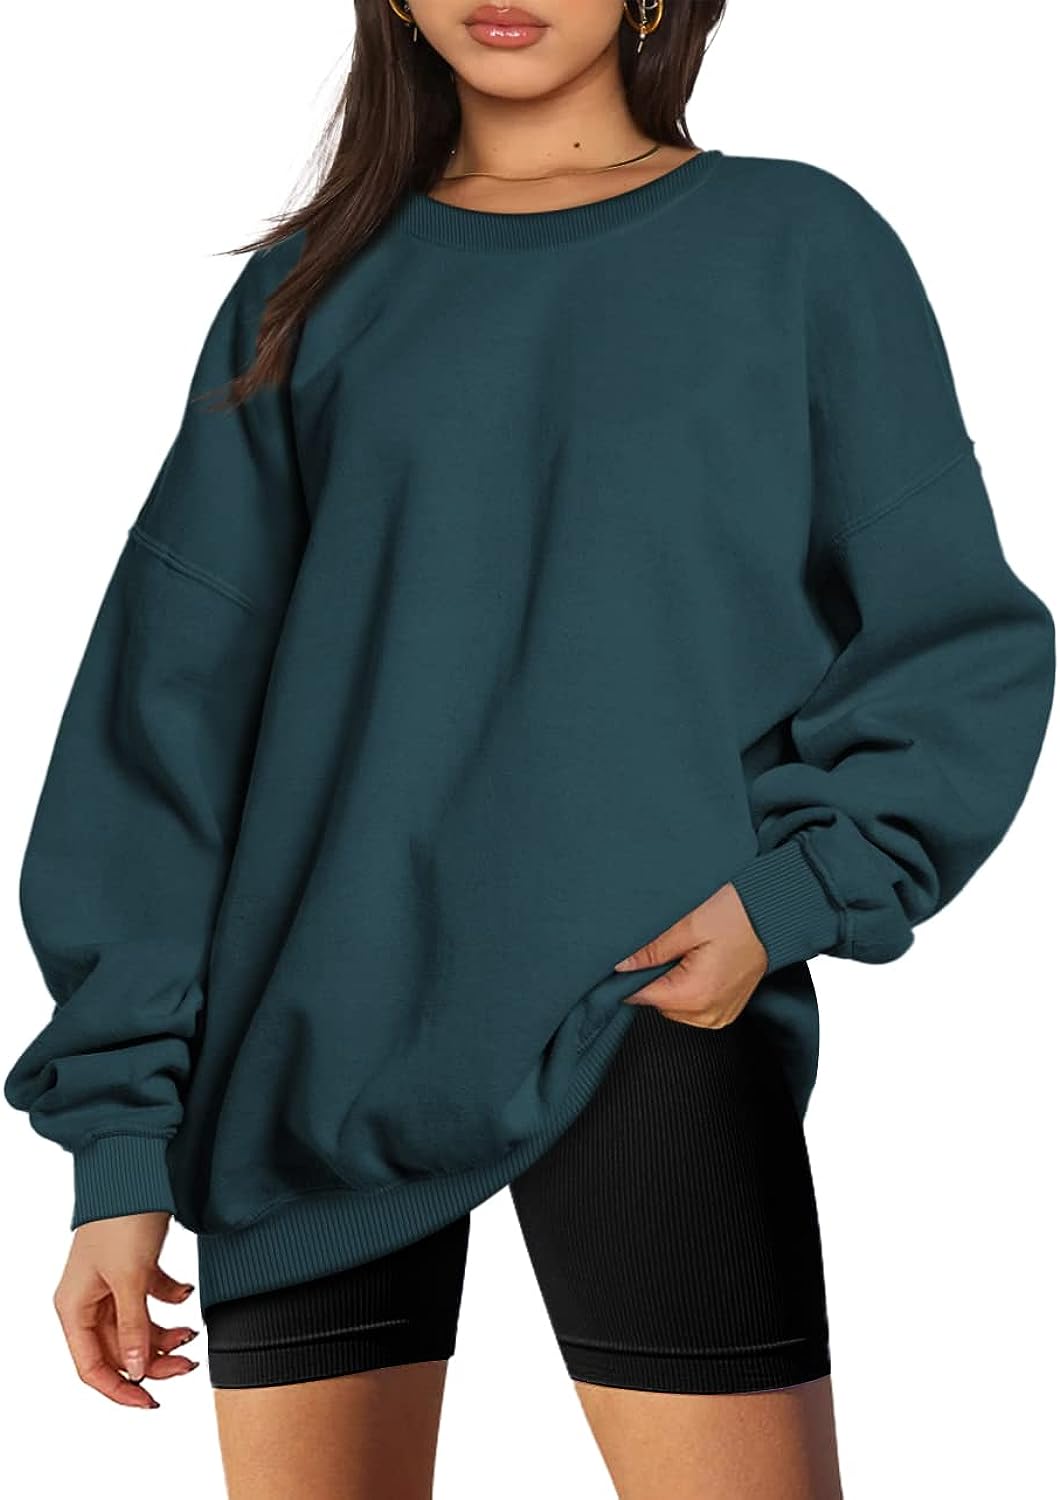 Trendy Queen Oversized Sweatshirts for Women Fleece Hoodies Crewneck Pullover Comfy Sweaters Clothes Fall Winter Fashion 2023